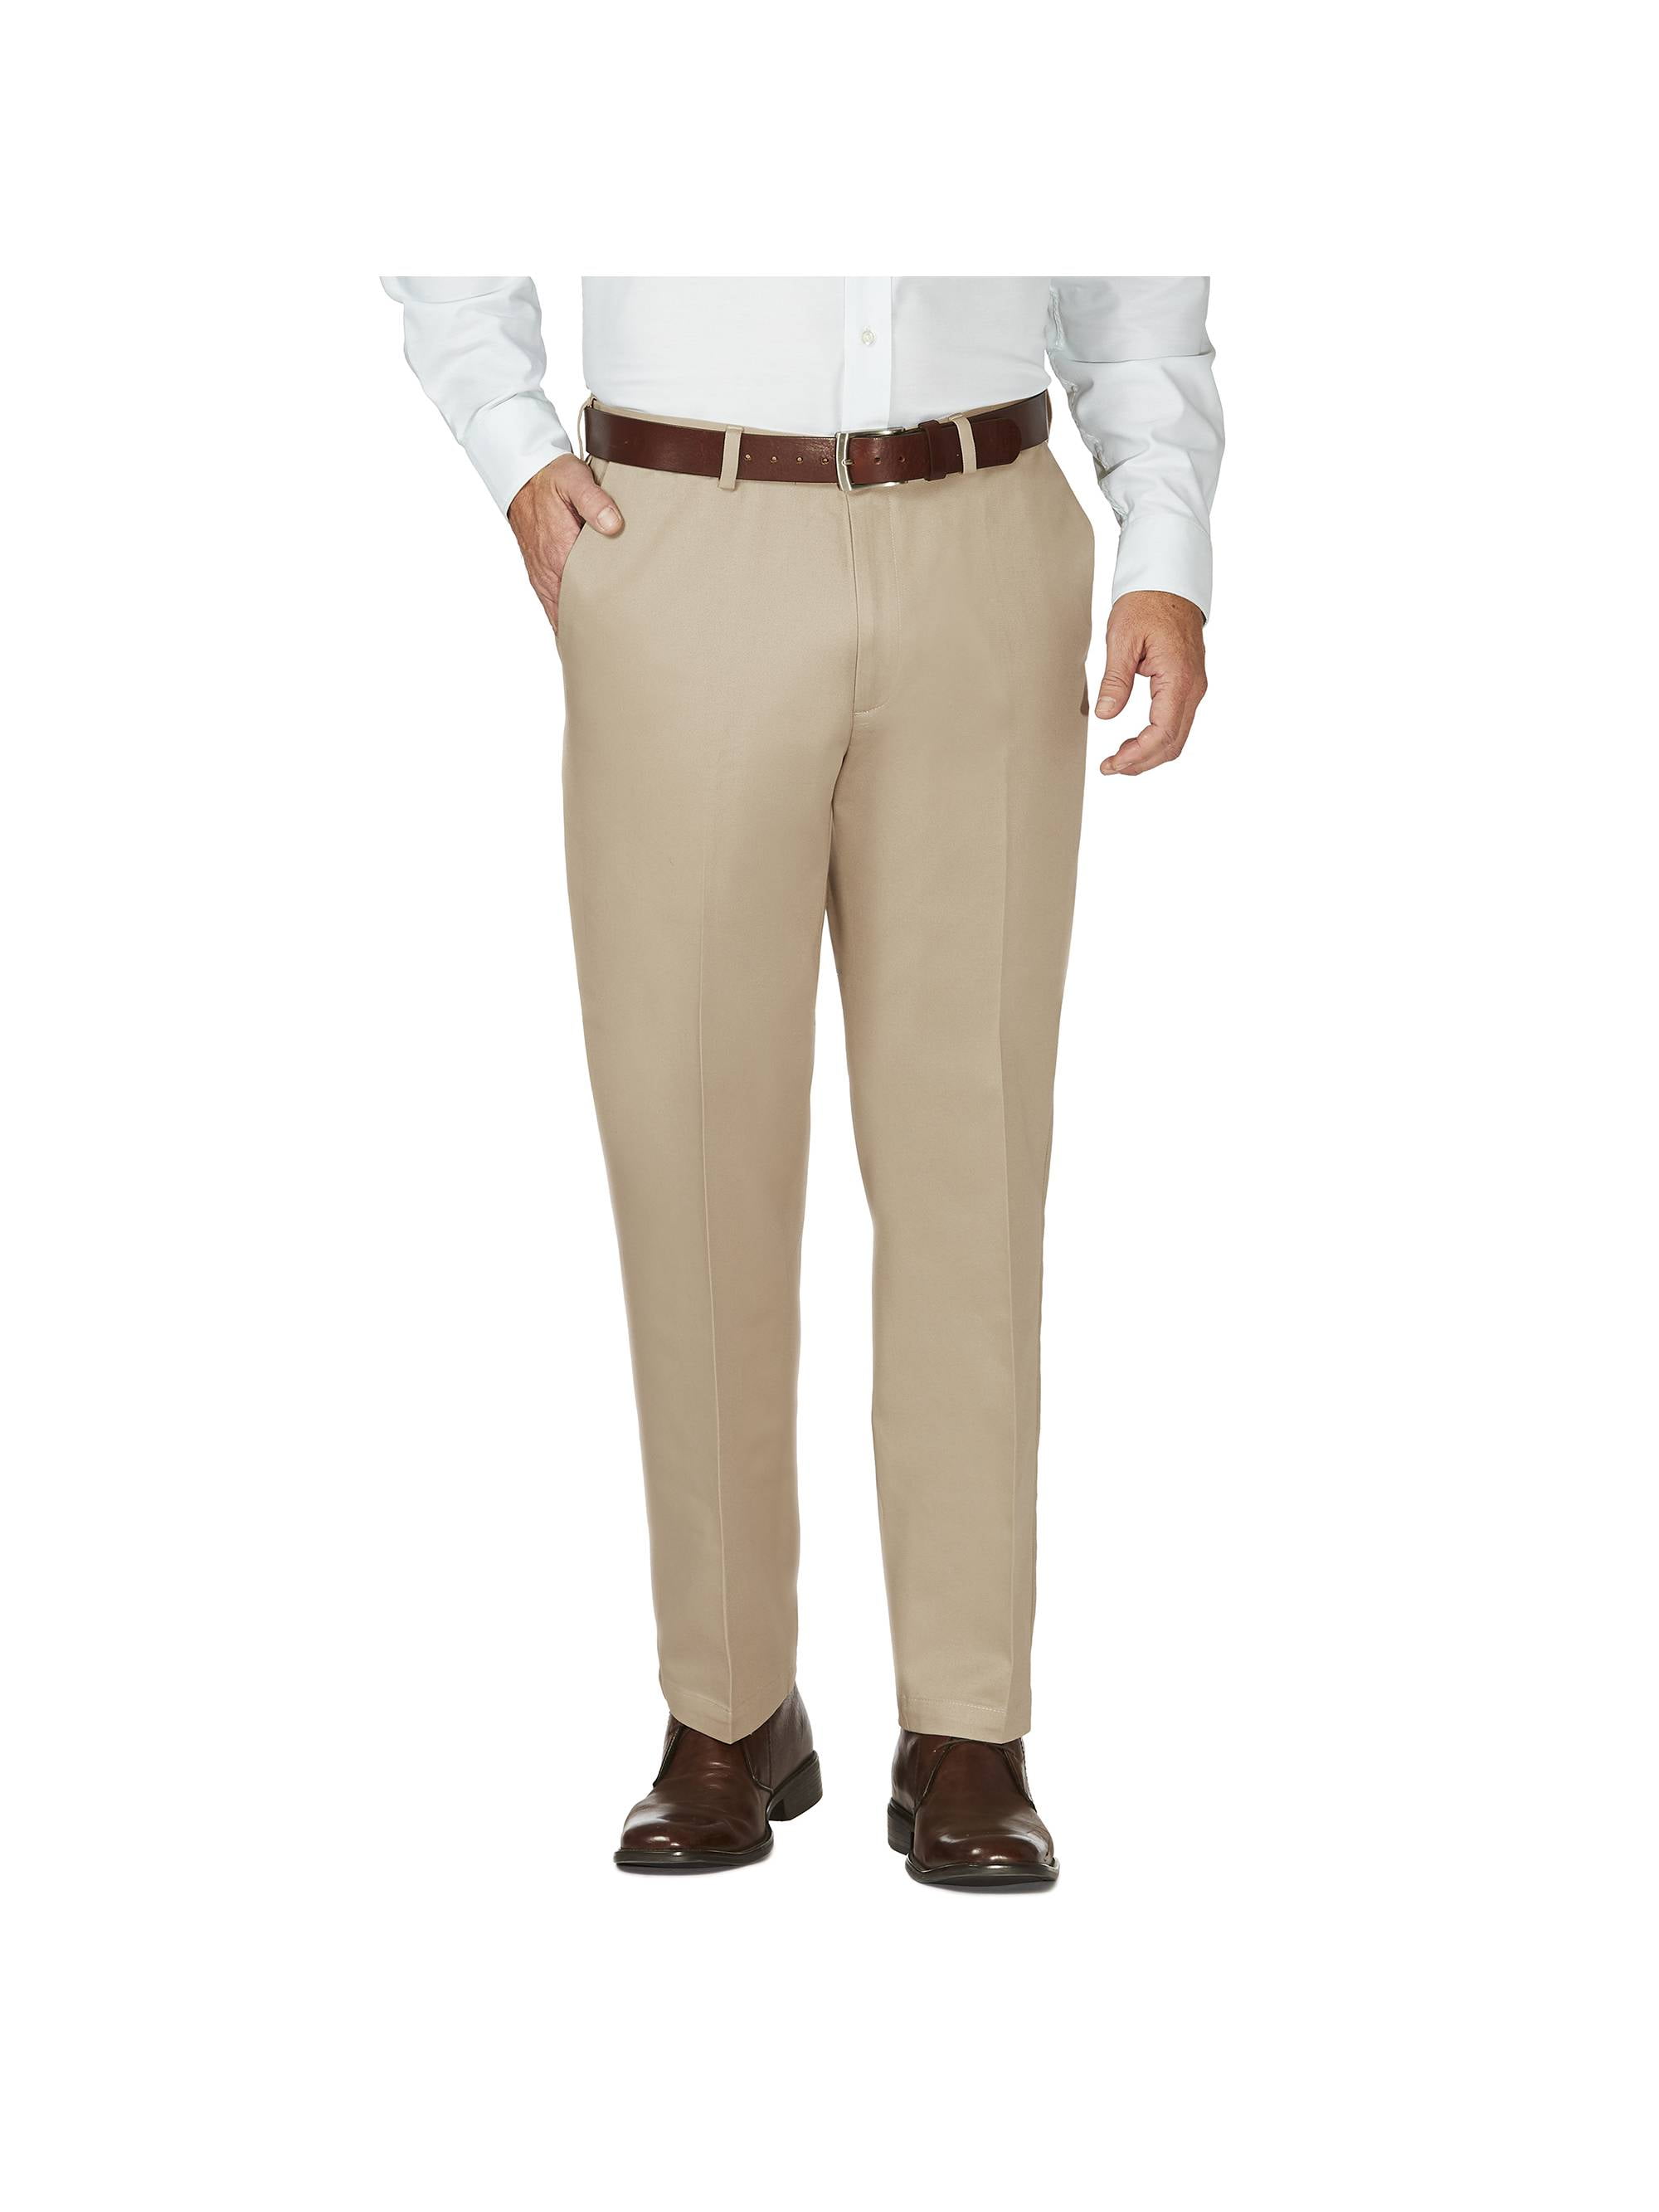 Men's Work To Weekend® Khaki Flat Front Pant Classic Fit